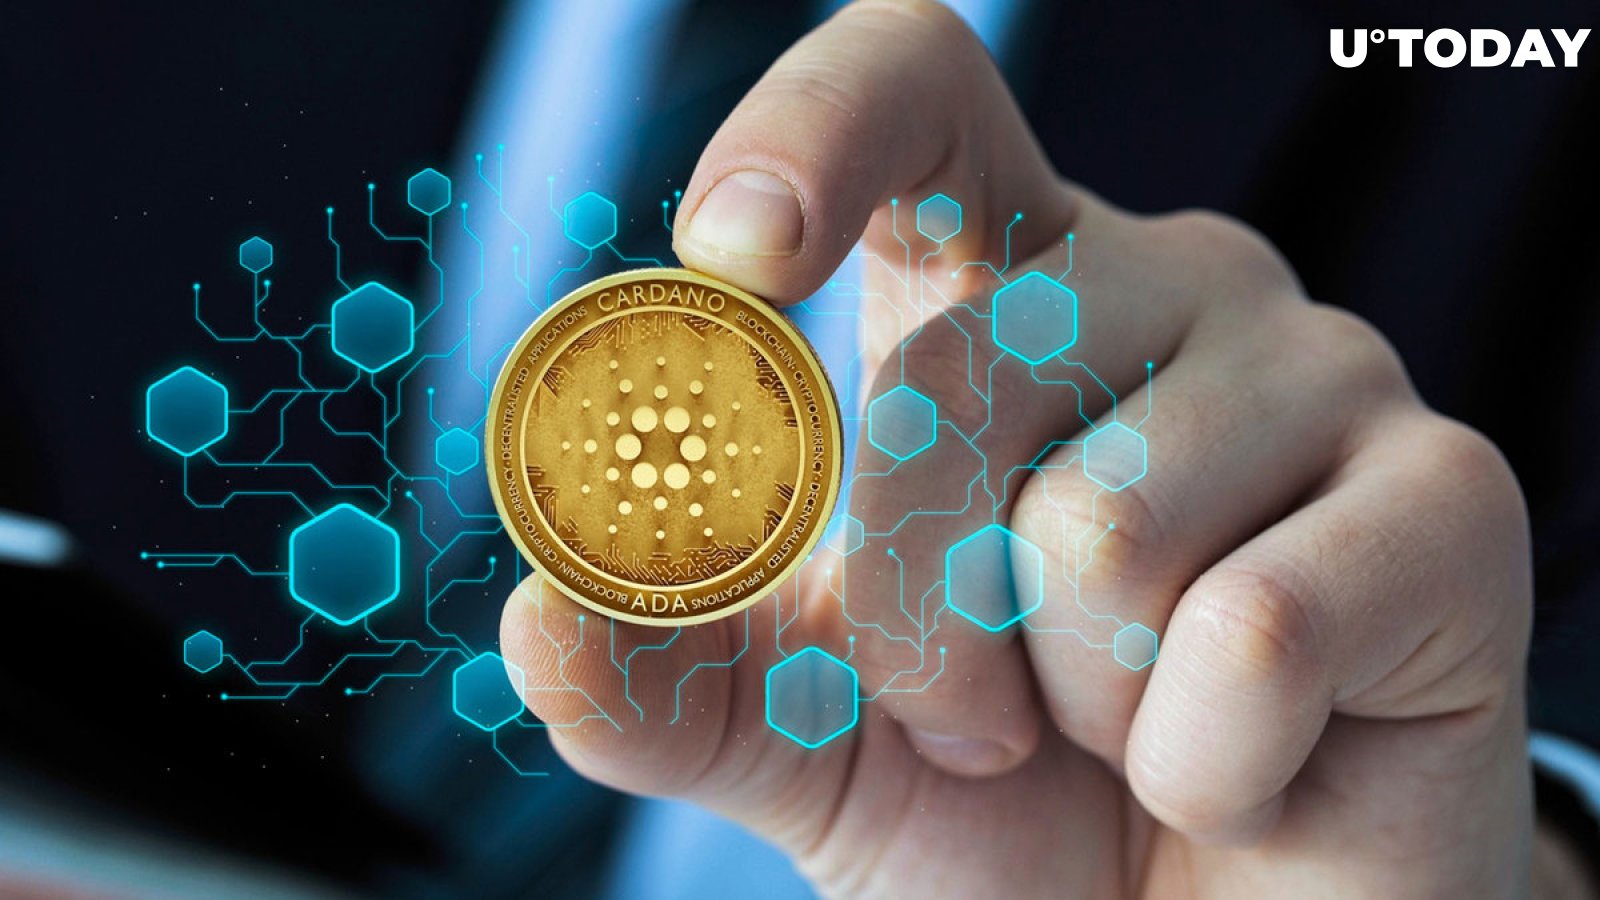 Cardano (ADA) Makes Epic Game-Changing Testnet Announcement: Here's Ultimate Guide